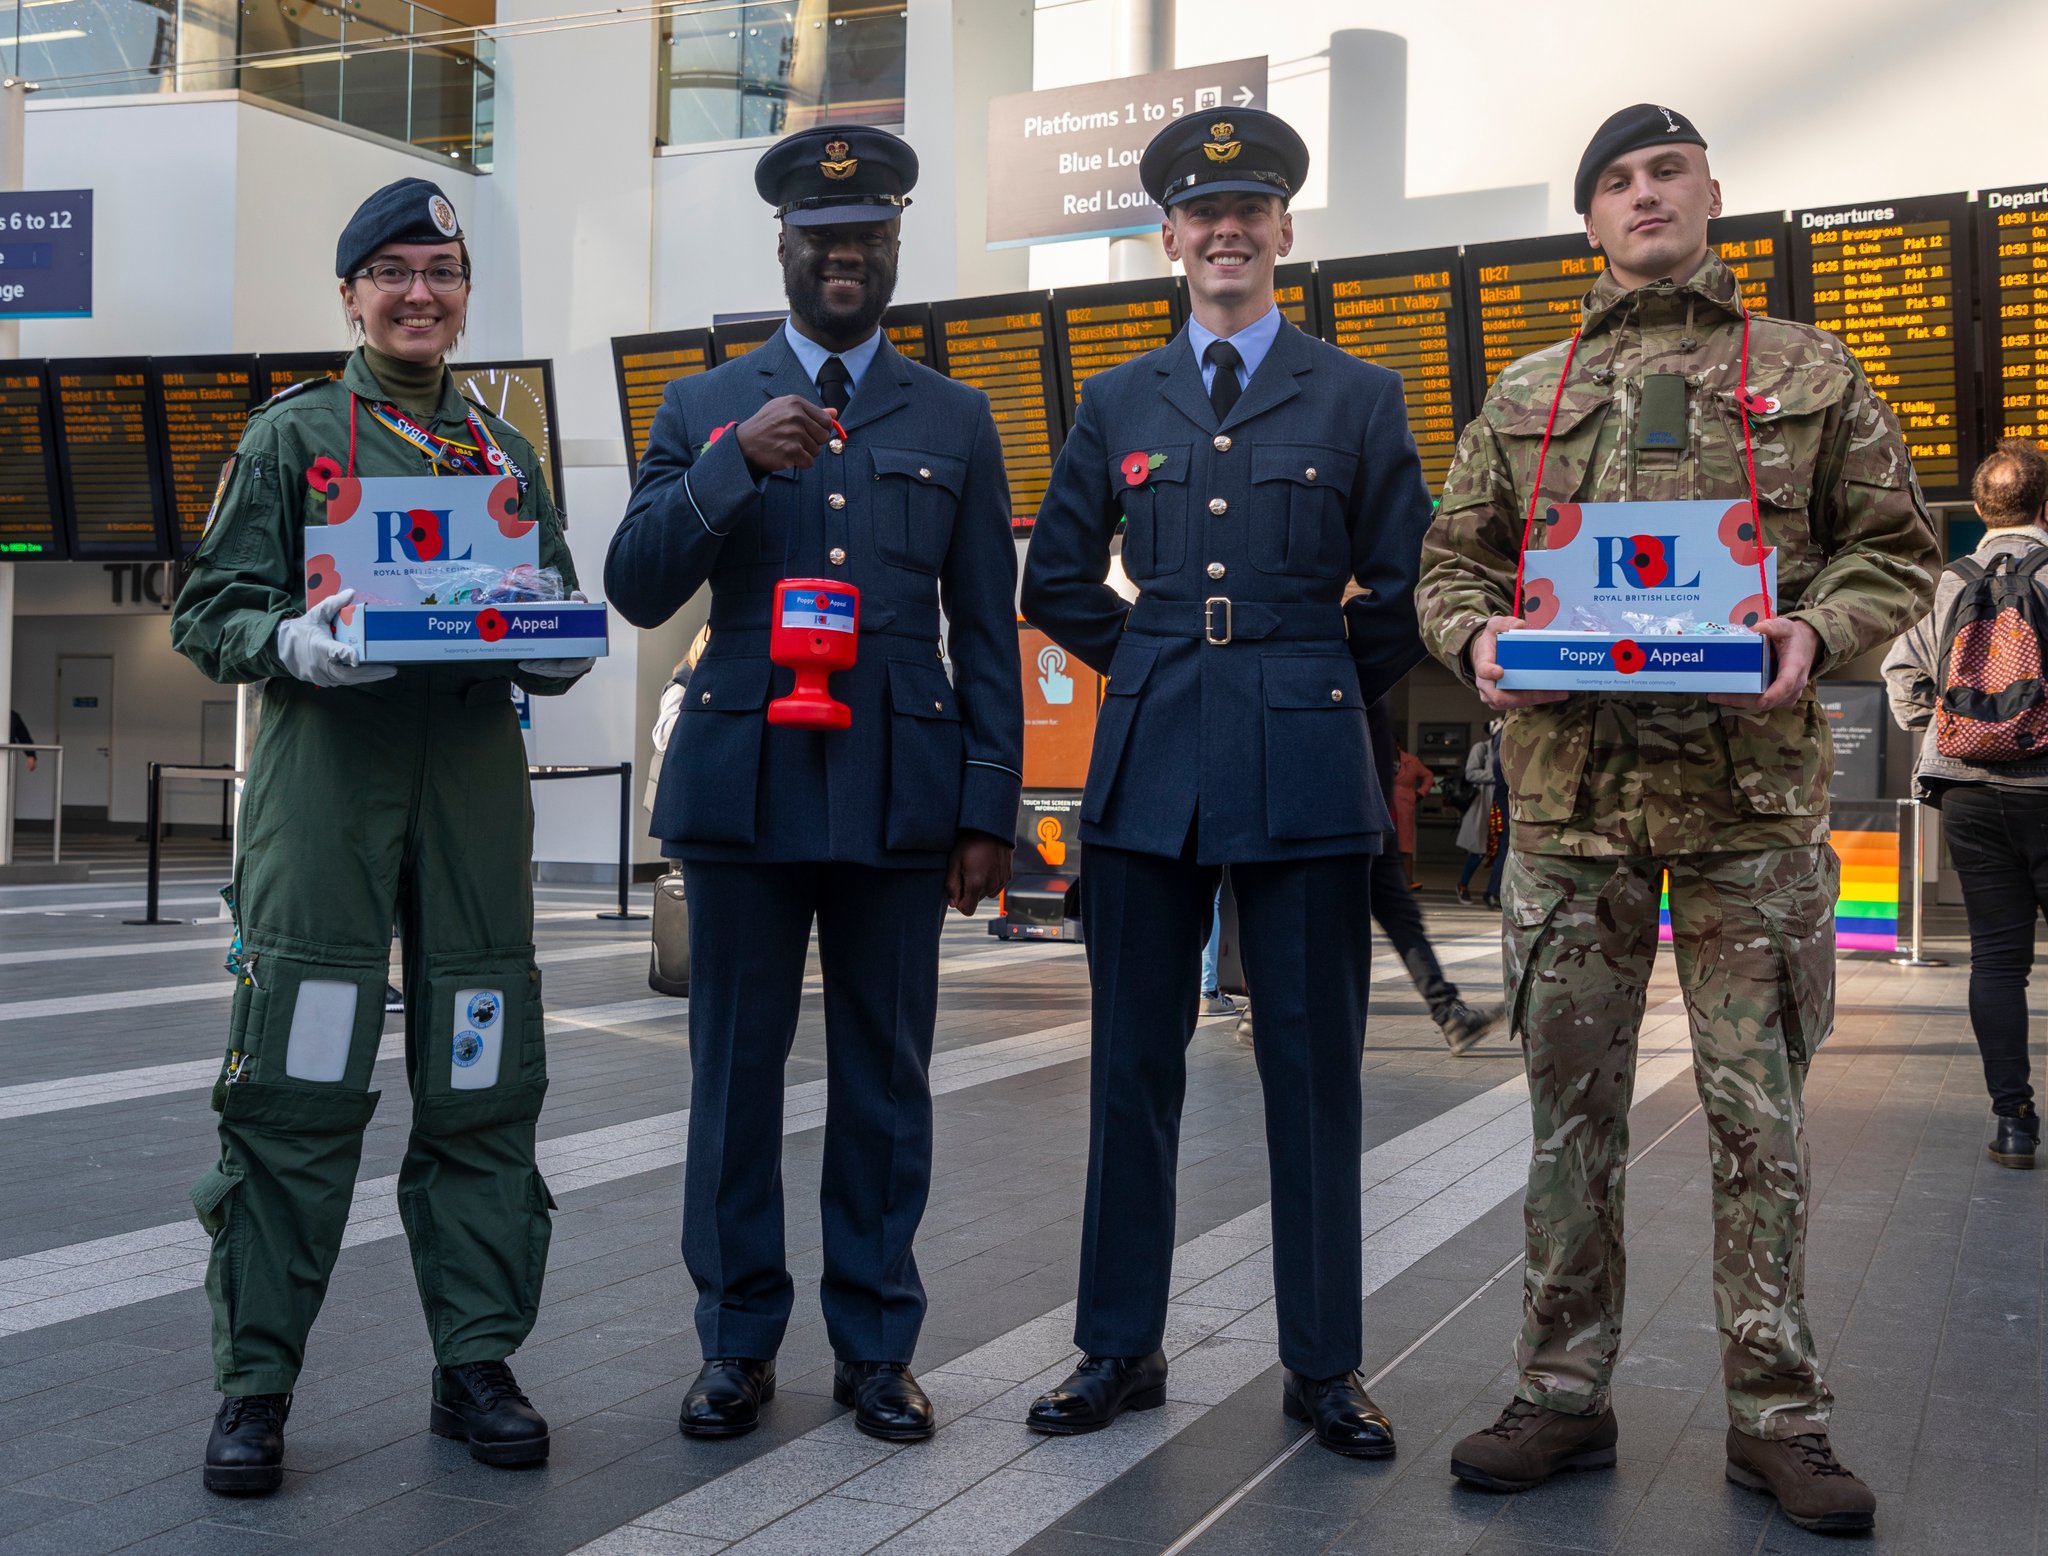 Personnel stand in a train station with Poppy bucket collections. 